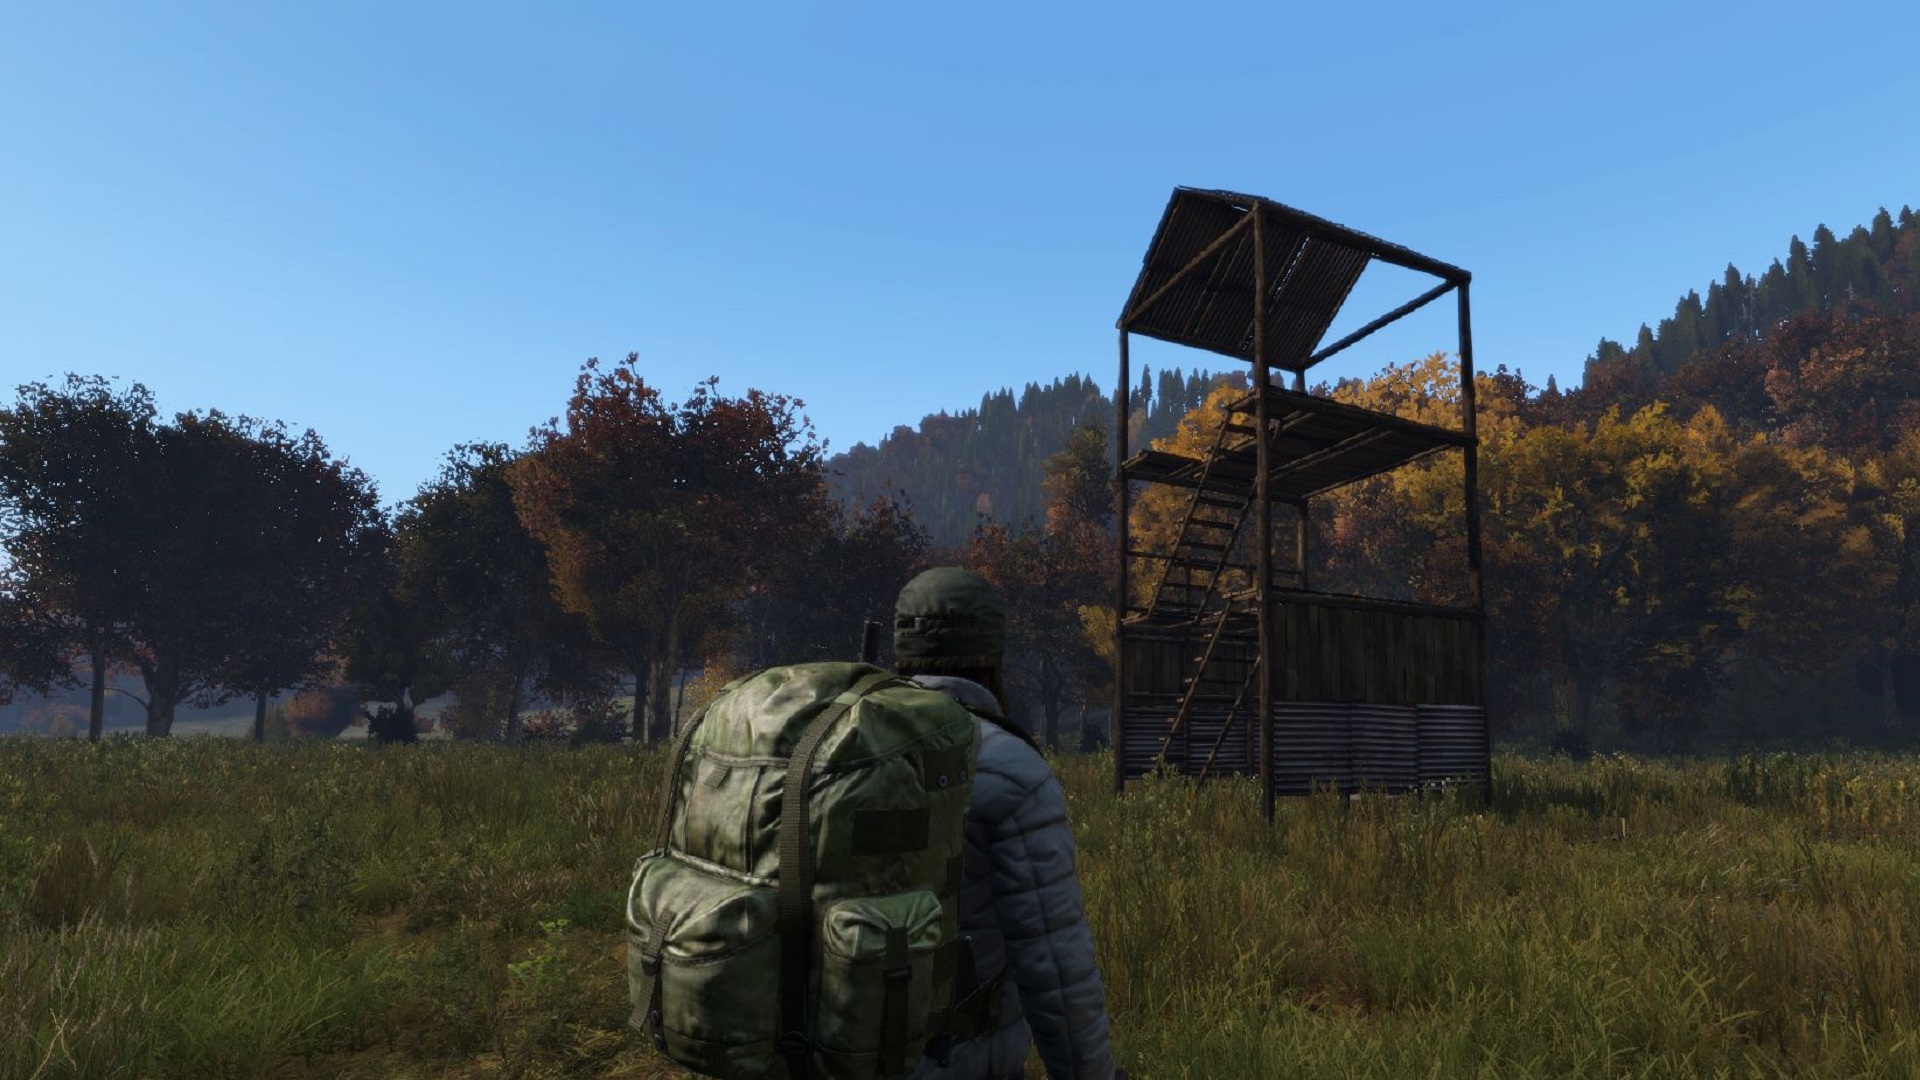 DayZ base building – recipes, tips, and more